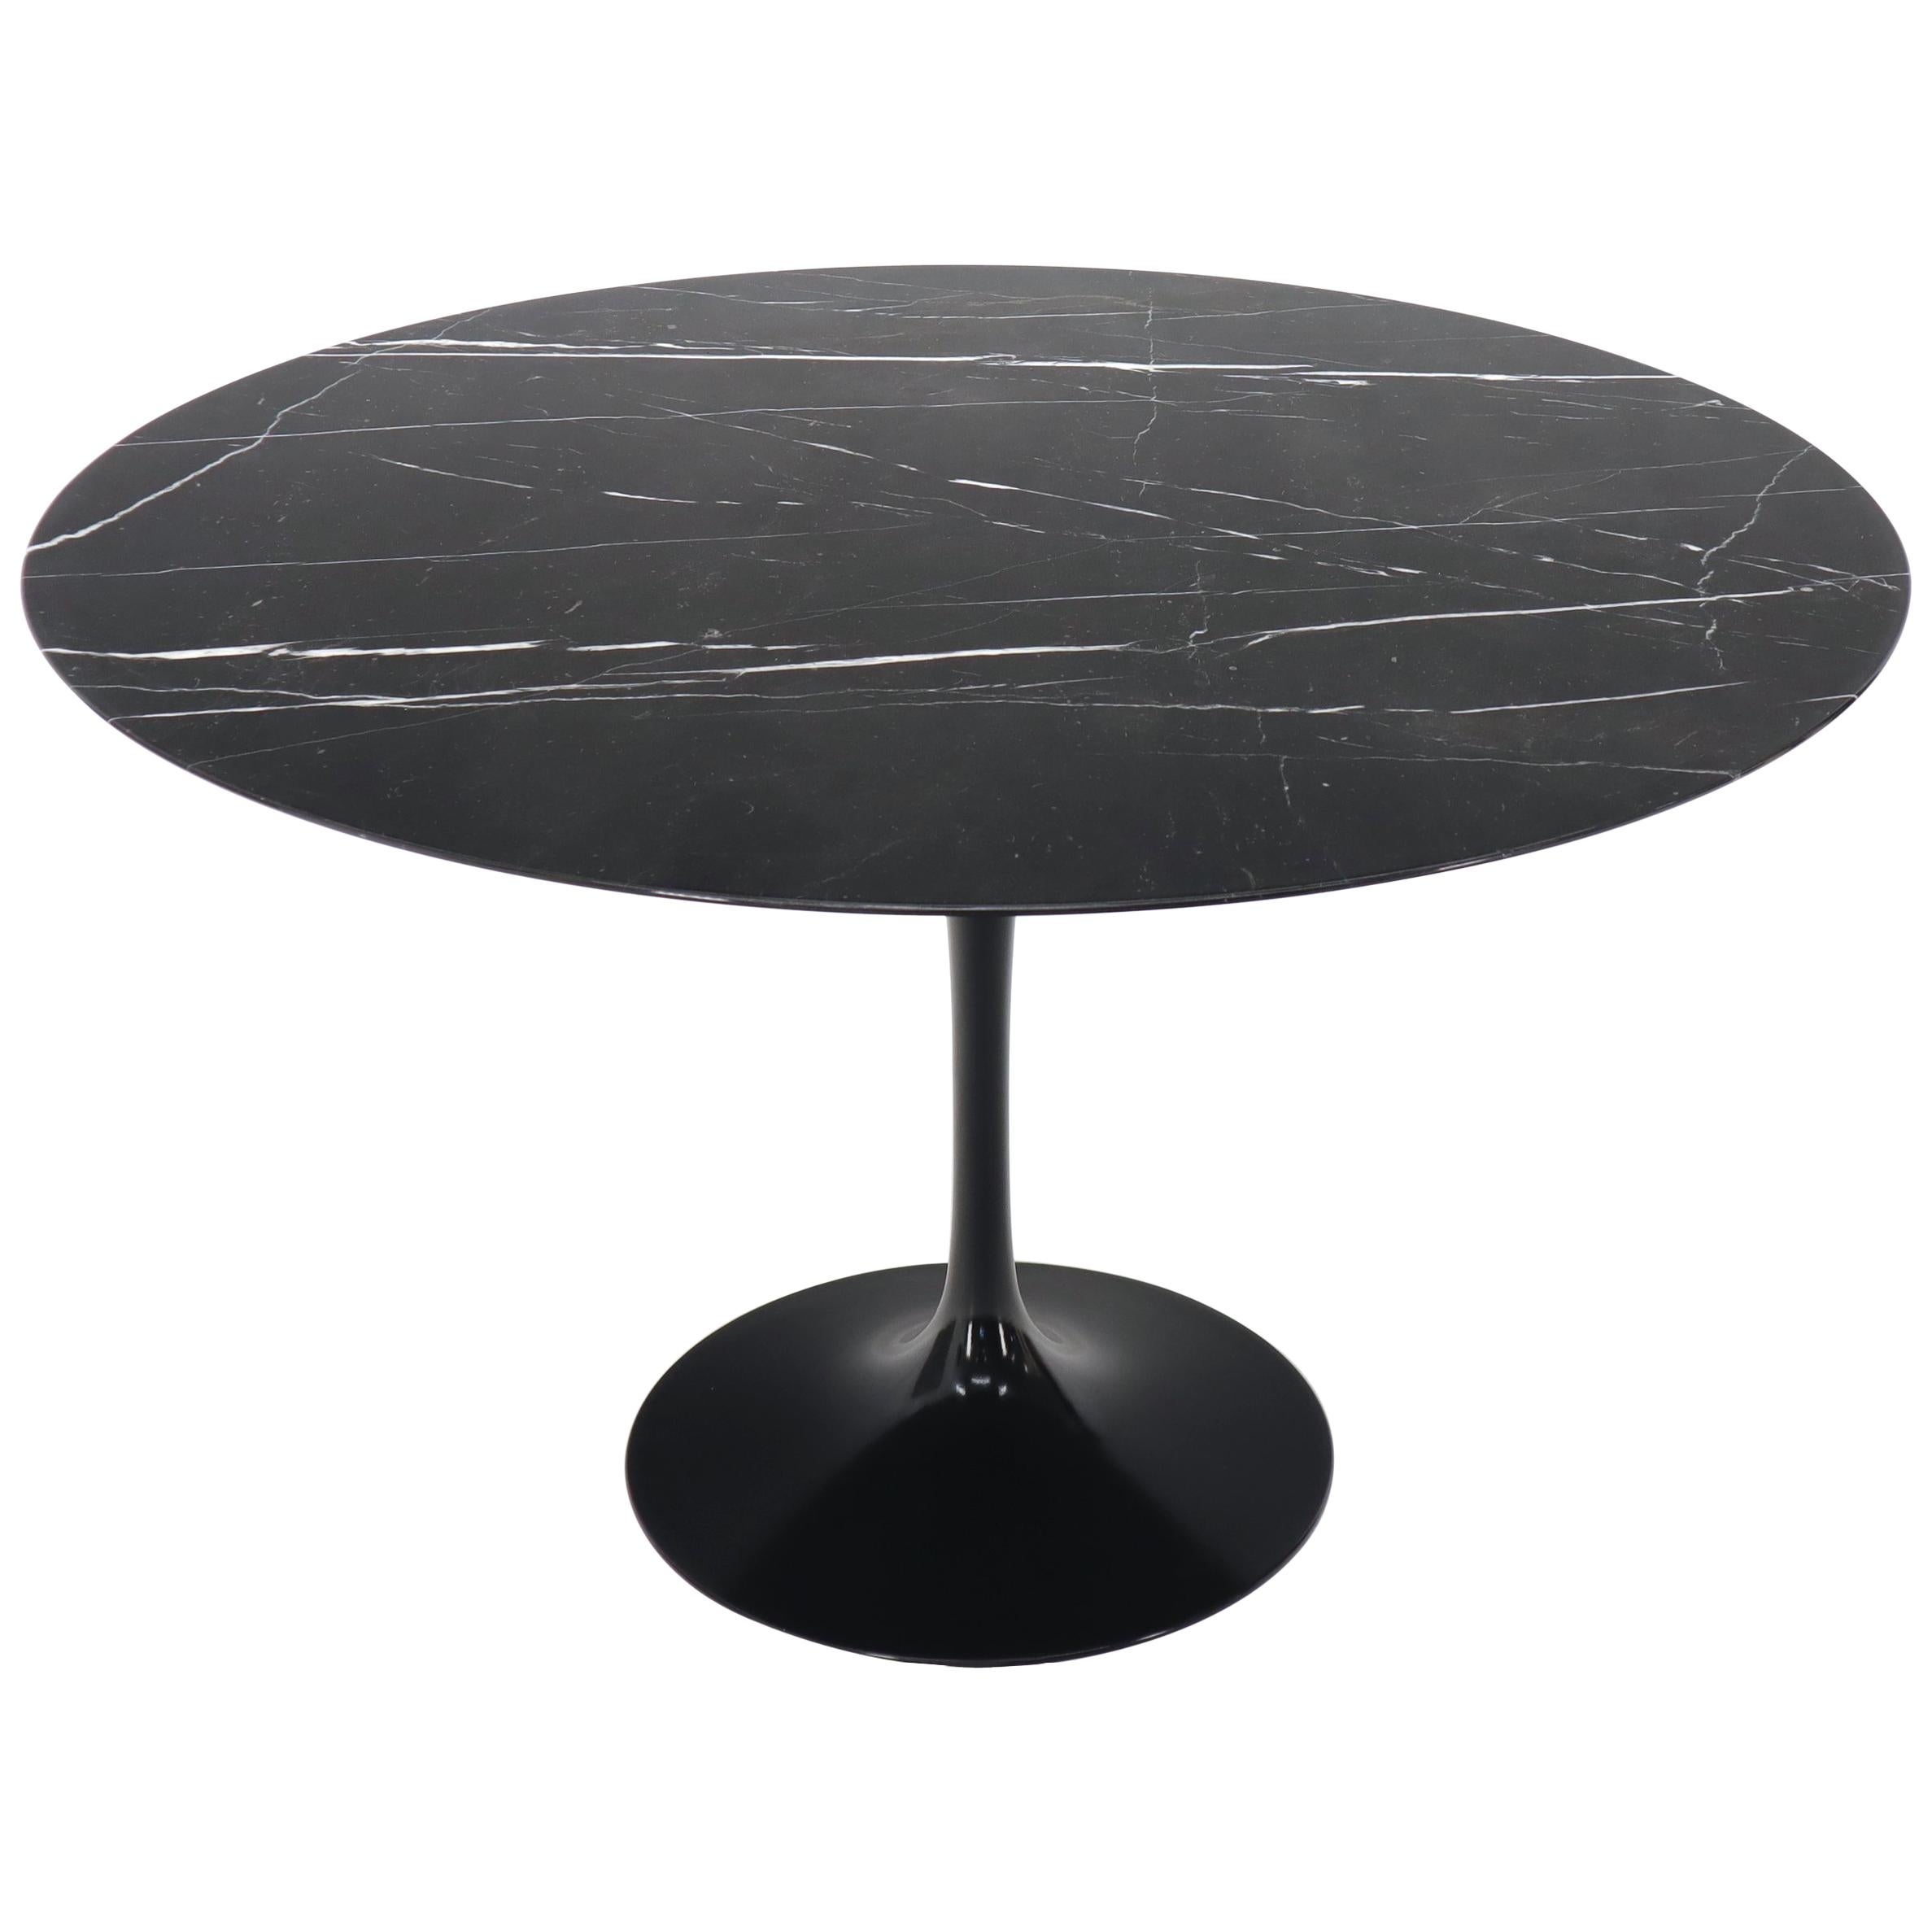 Large Round Black Marble Top Tulip Base Saarinen for Knoll Dining Table